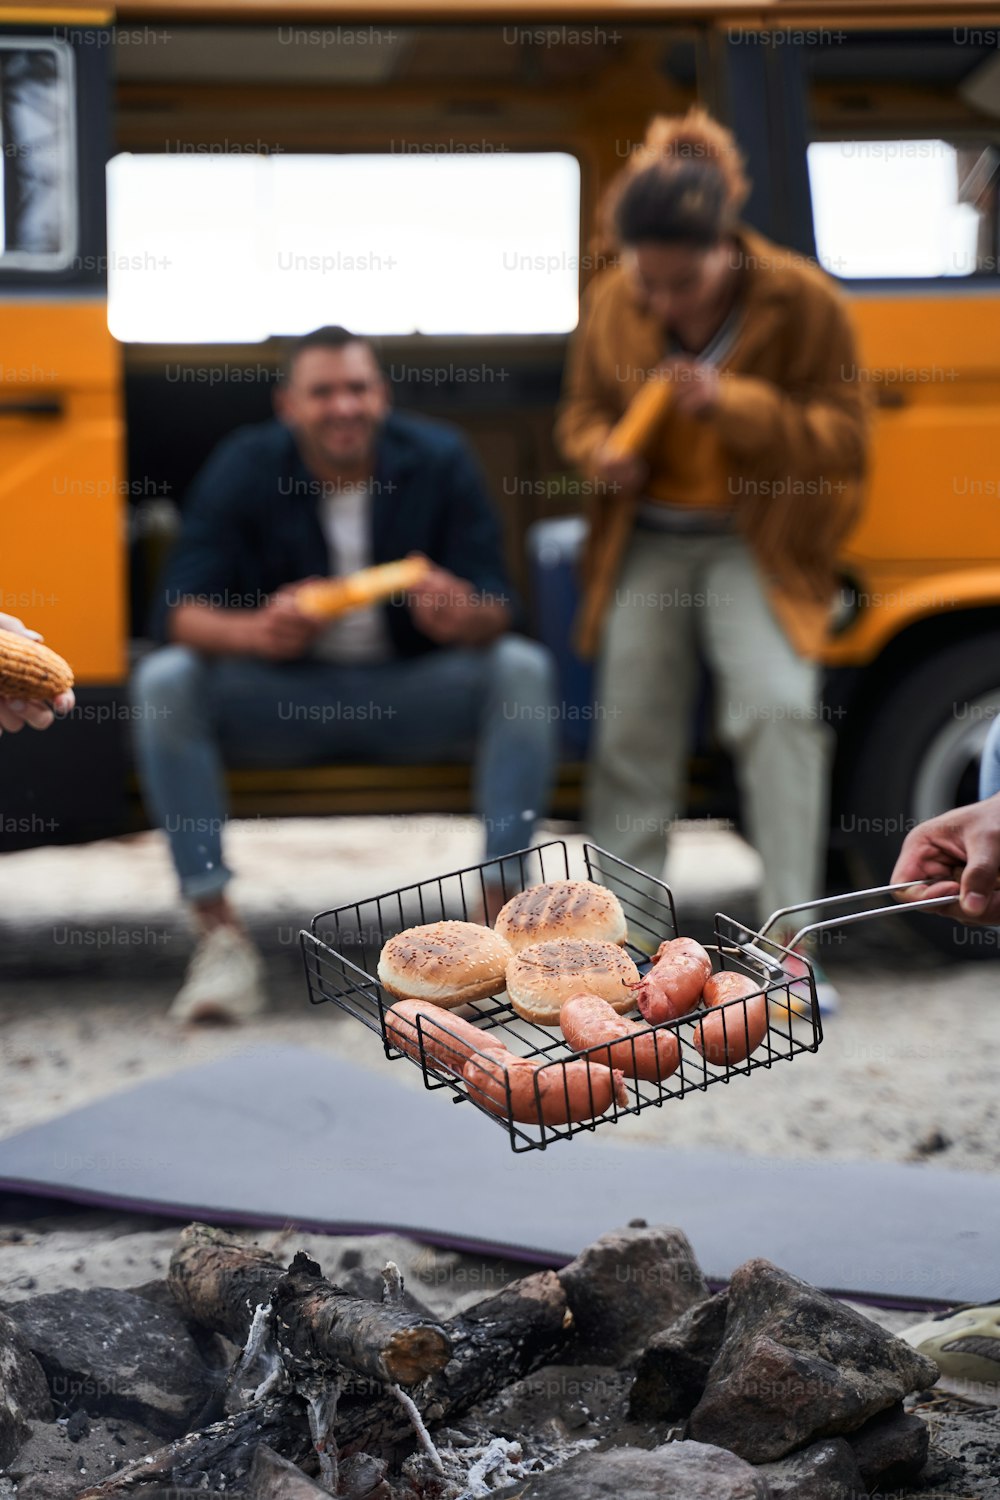 Group of tourists preparing their lunch in the forest. Focus on sausage and bun on the grill. People are blurred